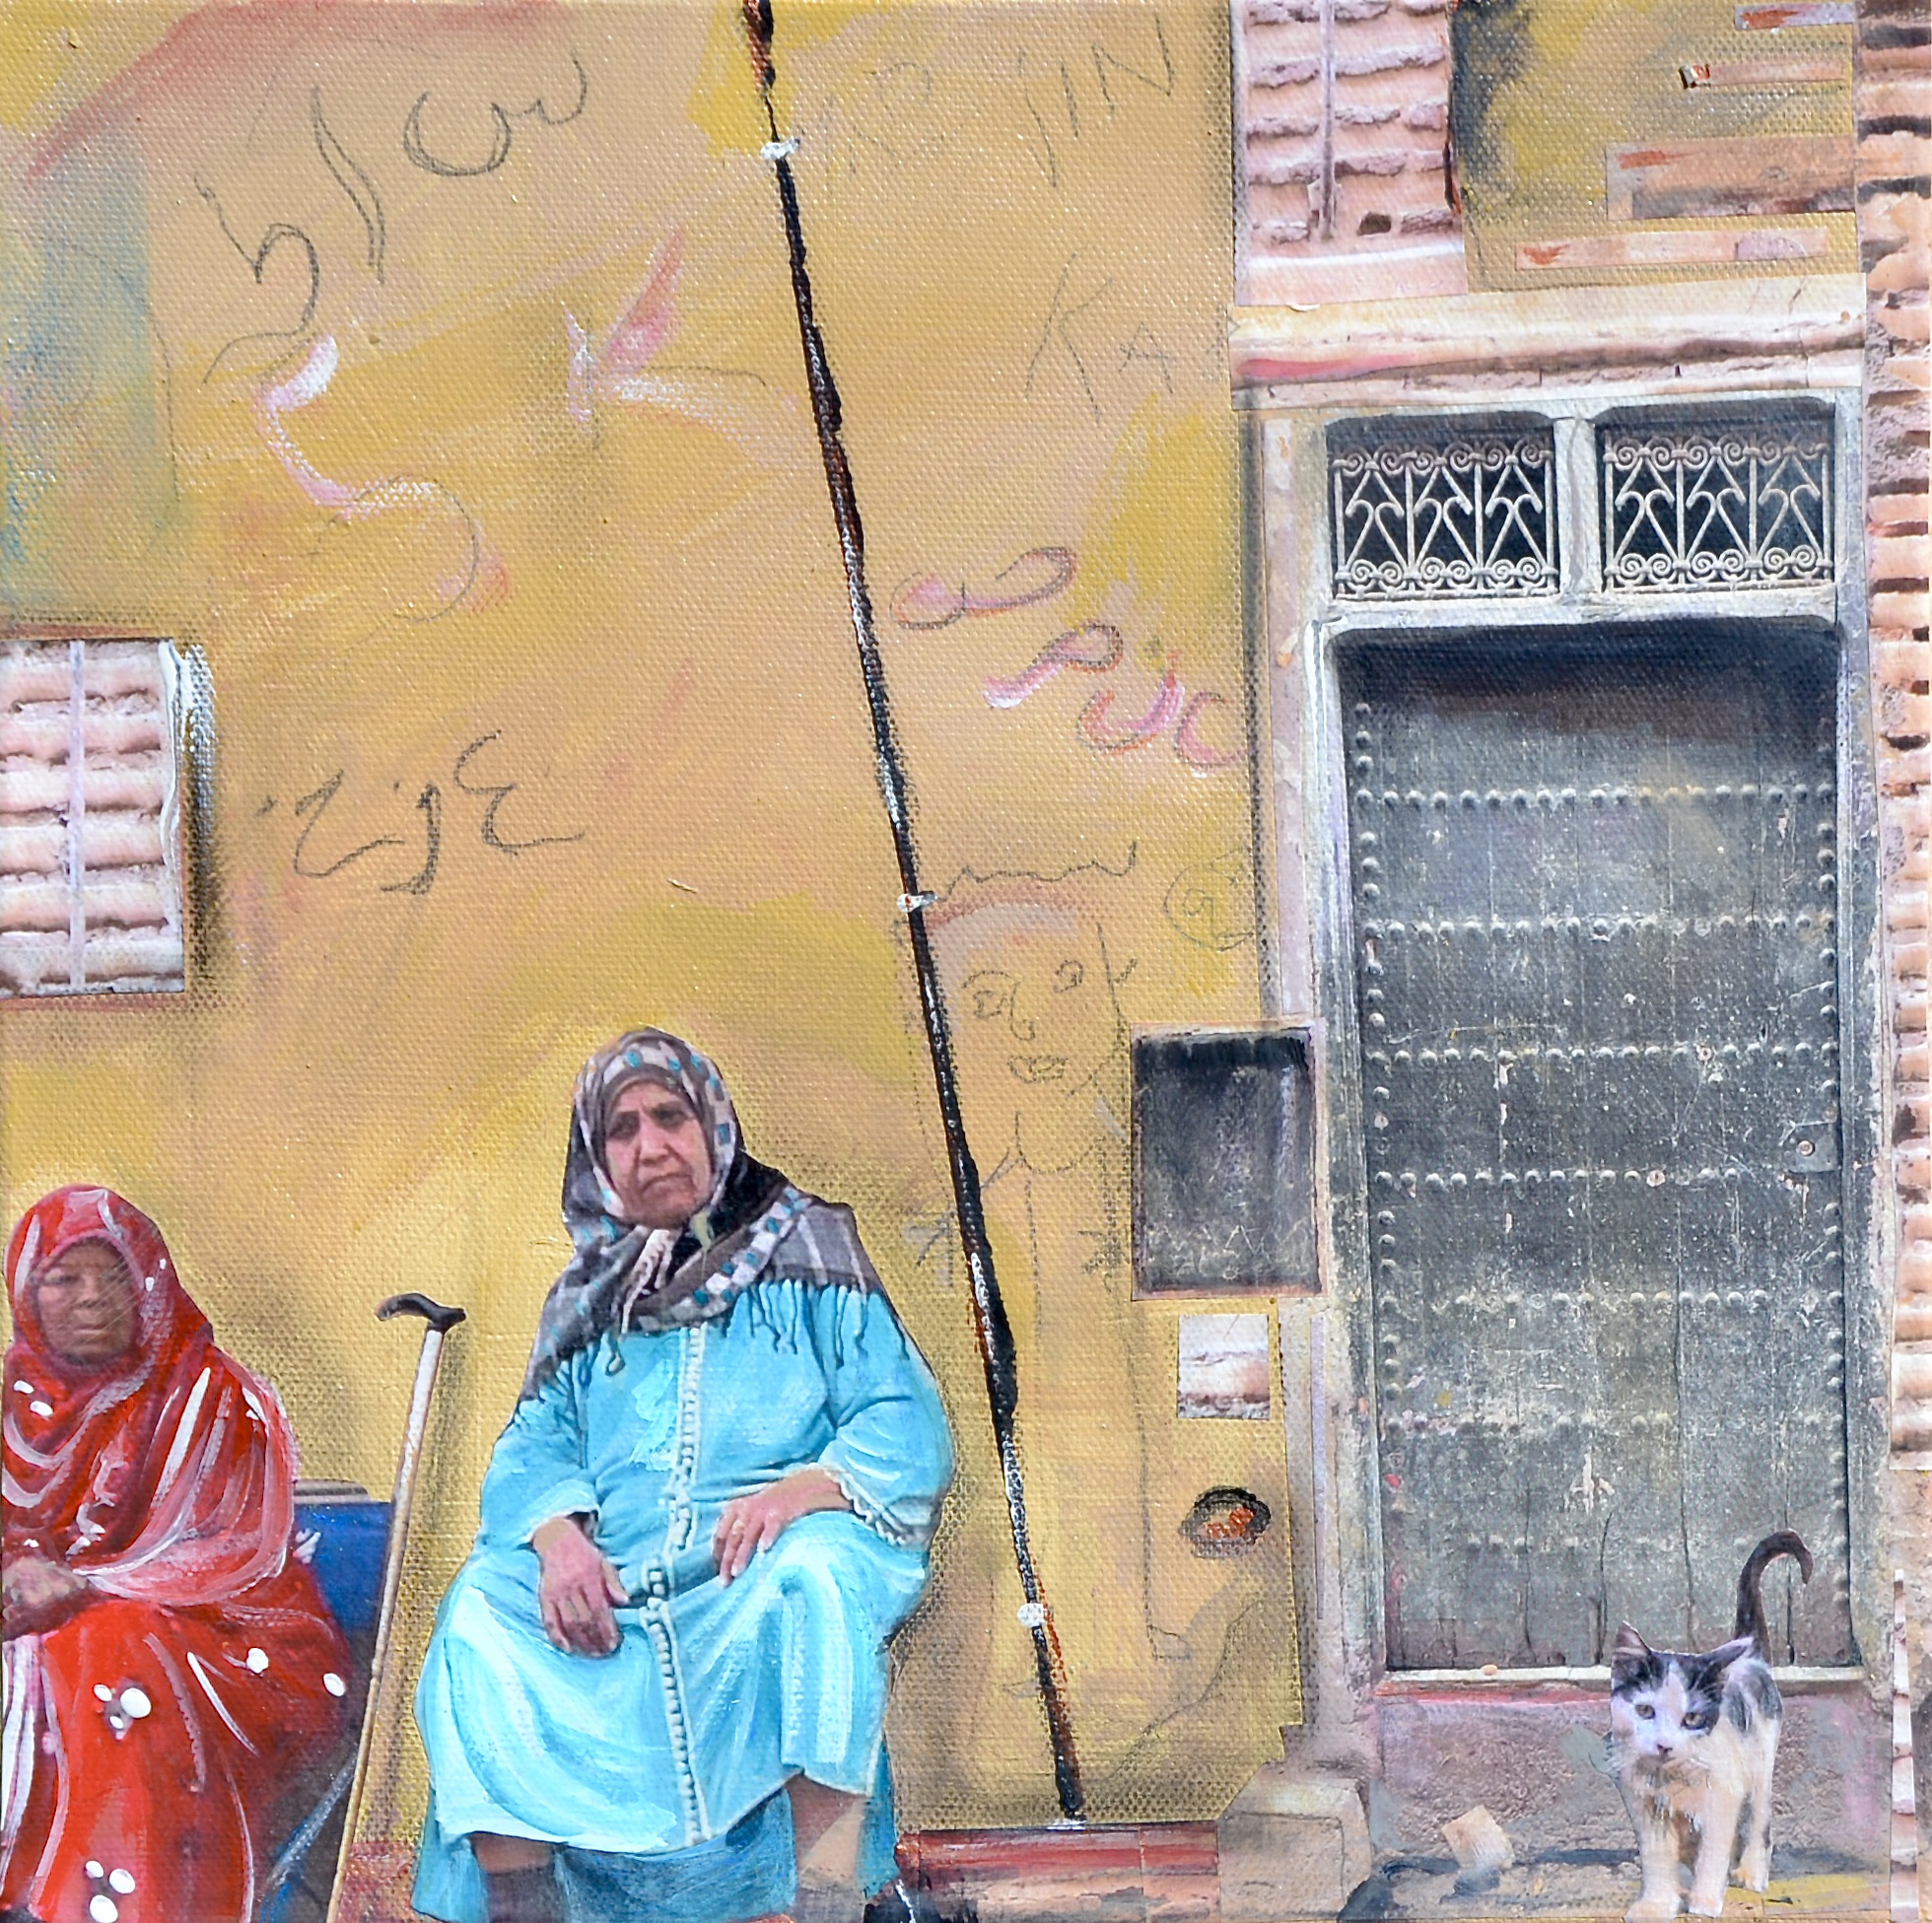 Moroccan Mash-Up #4: Two Ladies and a Cat 12X12